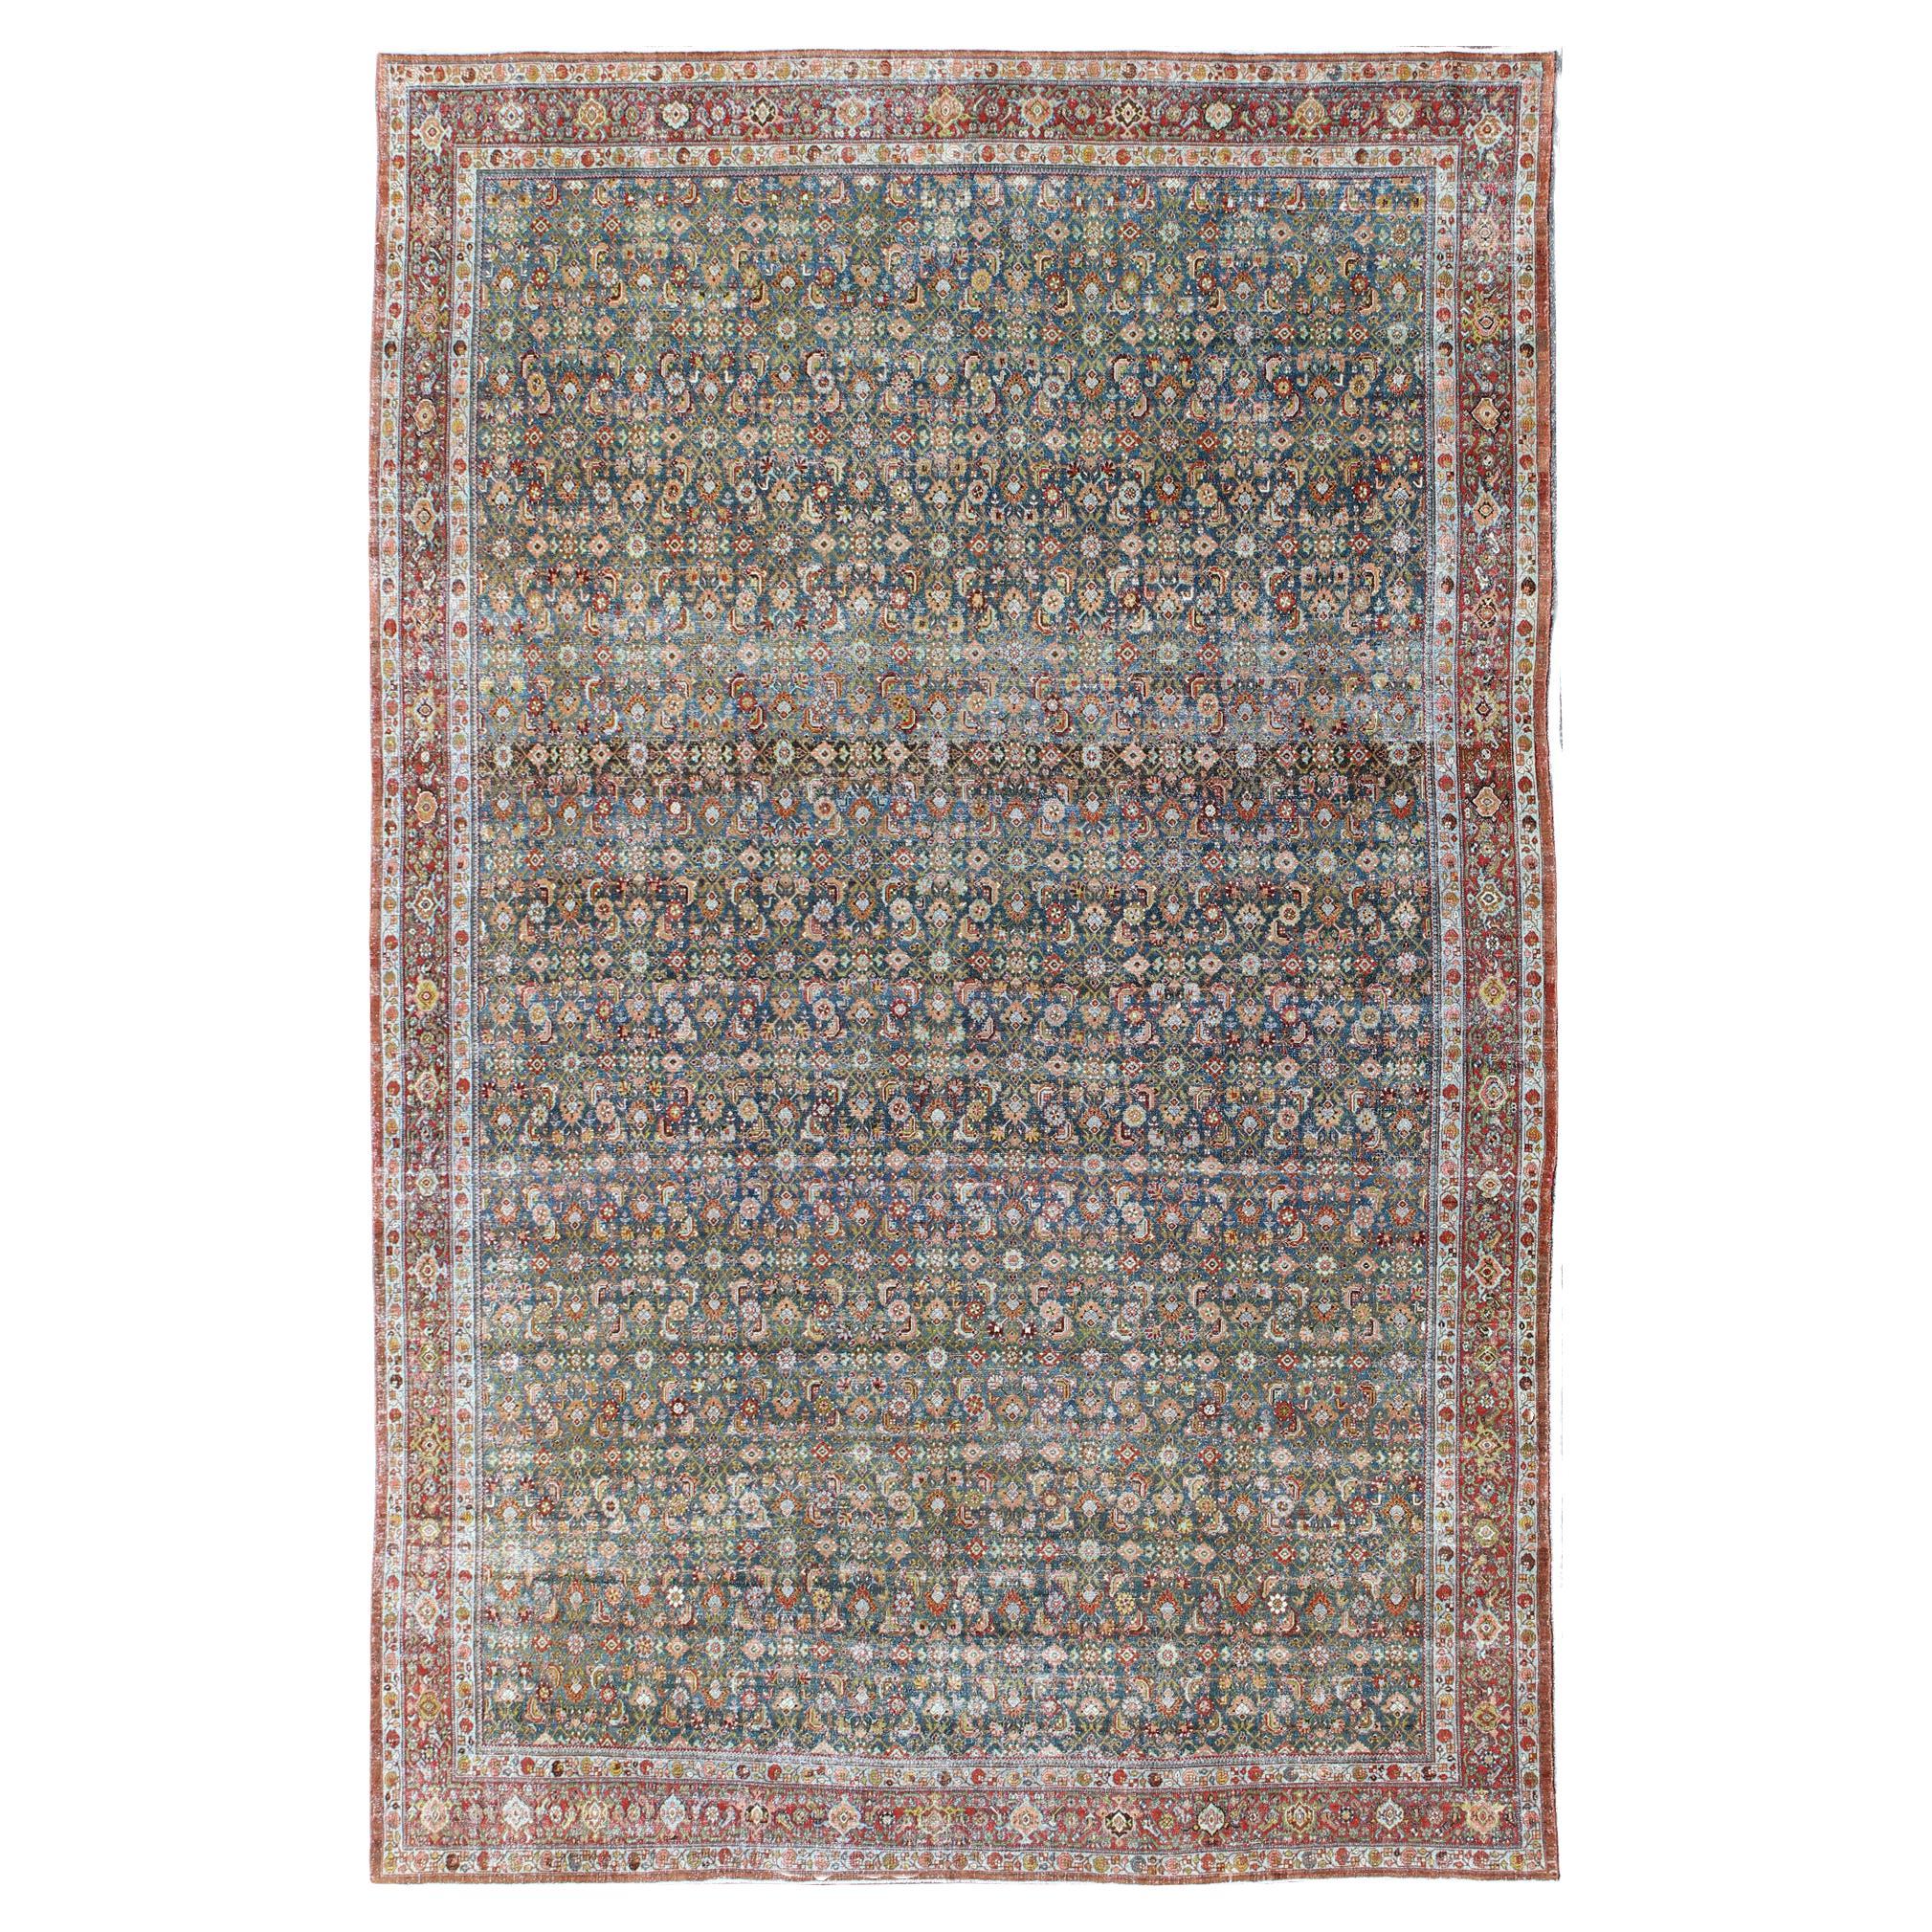 Large Antique Malayer Rug with Herati Pattern in Blue, Green, Teal and Red  For Sale